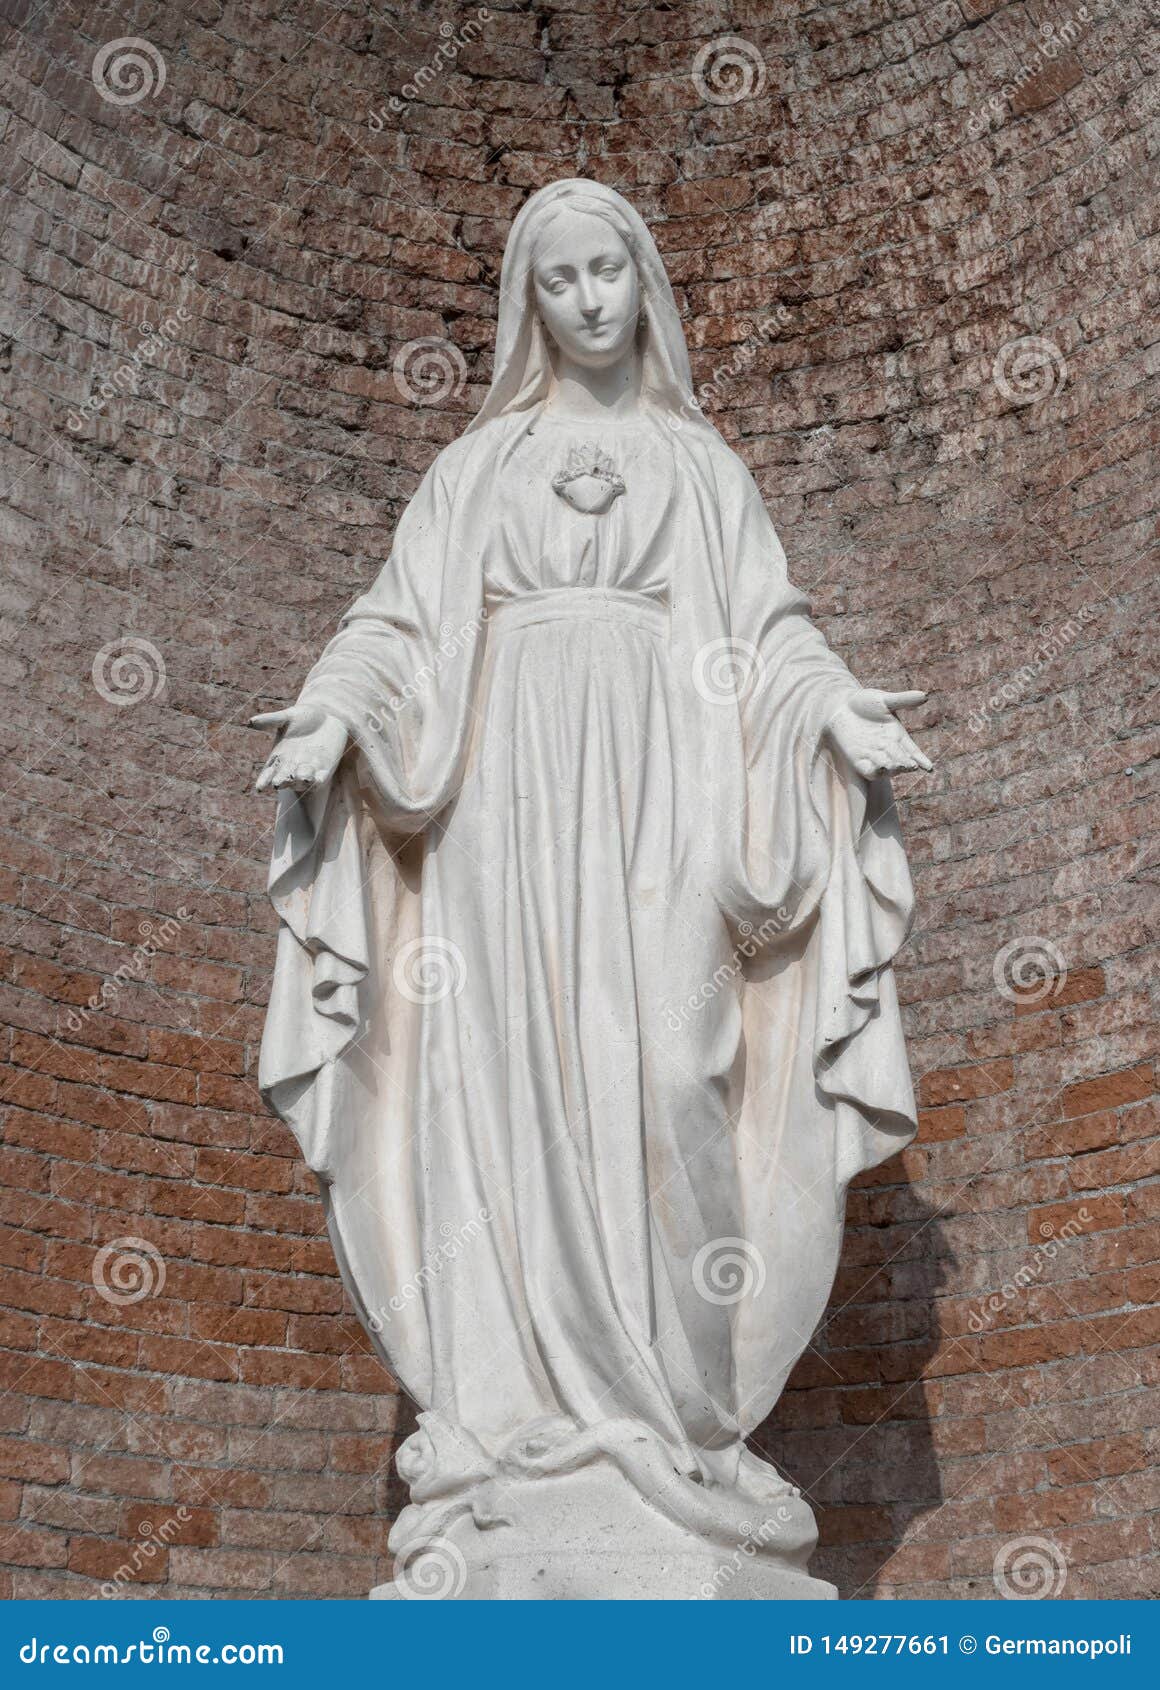 Statua w kamieniu maryja dziewica. Statue in stone of Virgin Mary. On background, red brick wall. Ideal for christmas and easter concepts and other